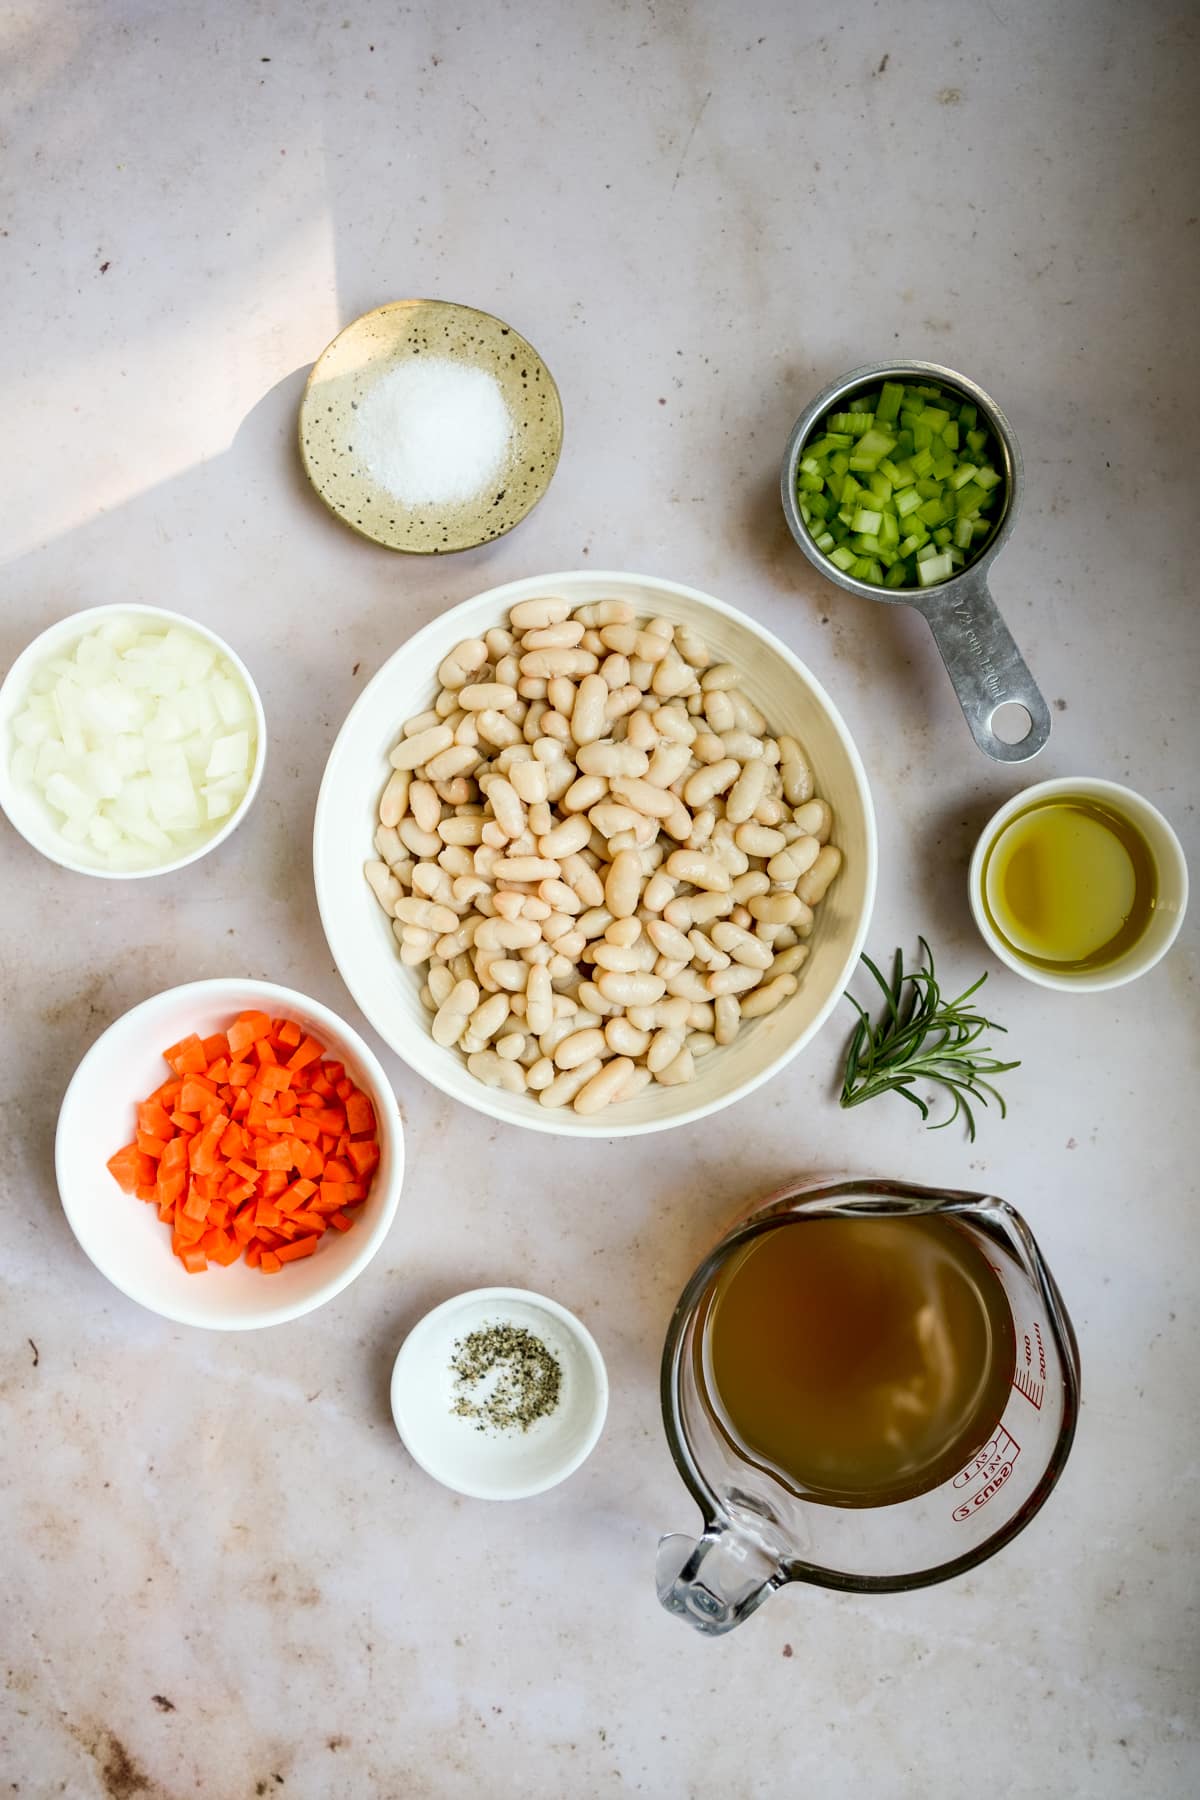 Italian white bean soup ingredients - cannellini beans, chopped celery, carrot, onion, olive oil, rosemary, vegetable stock, salt and pepper